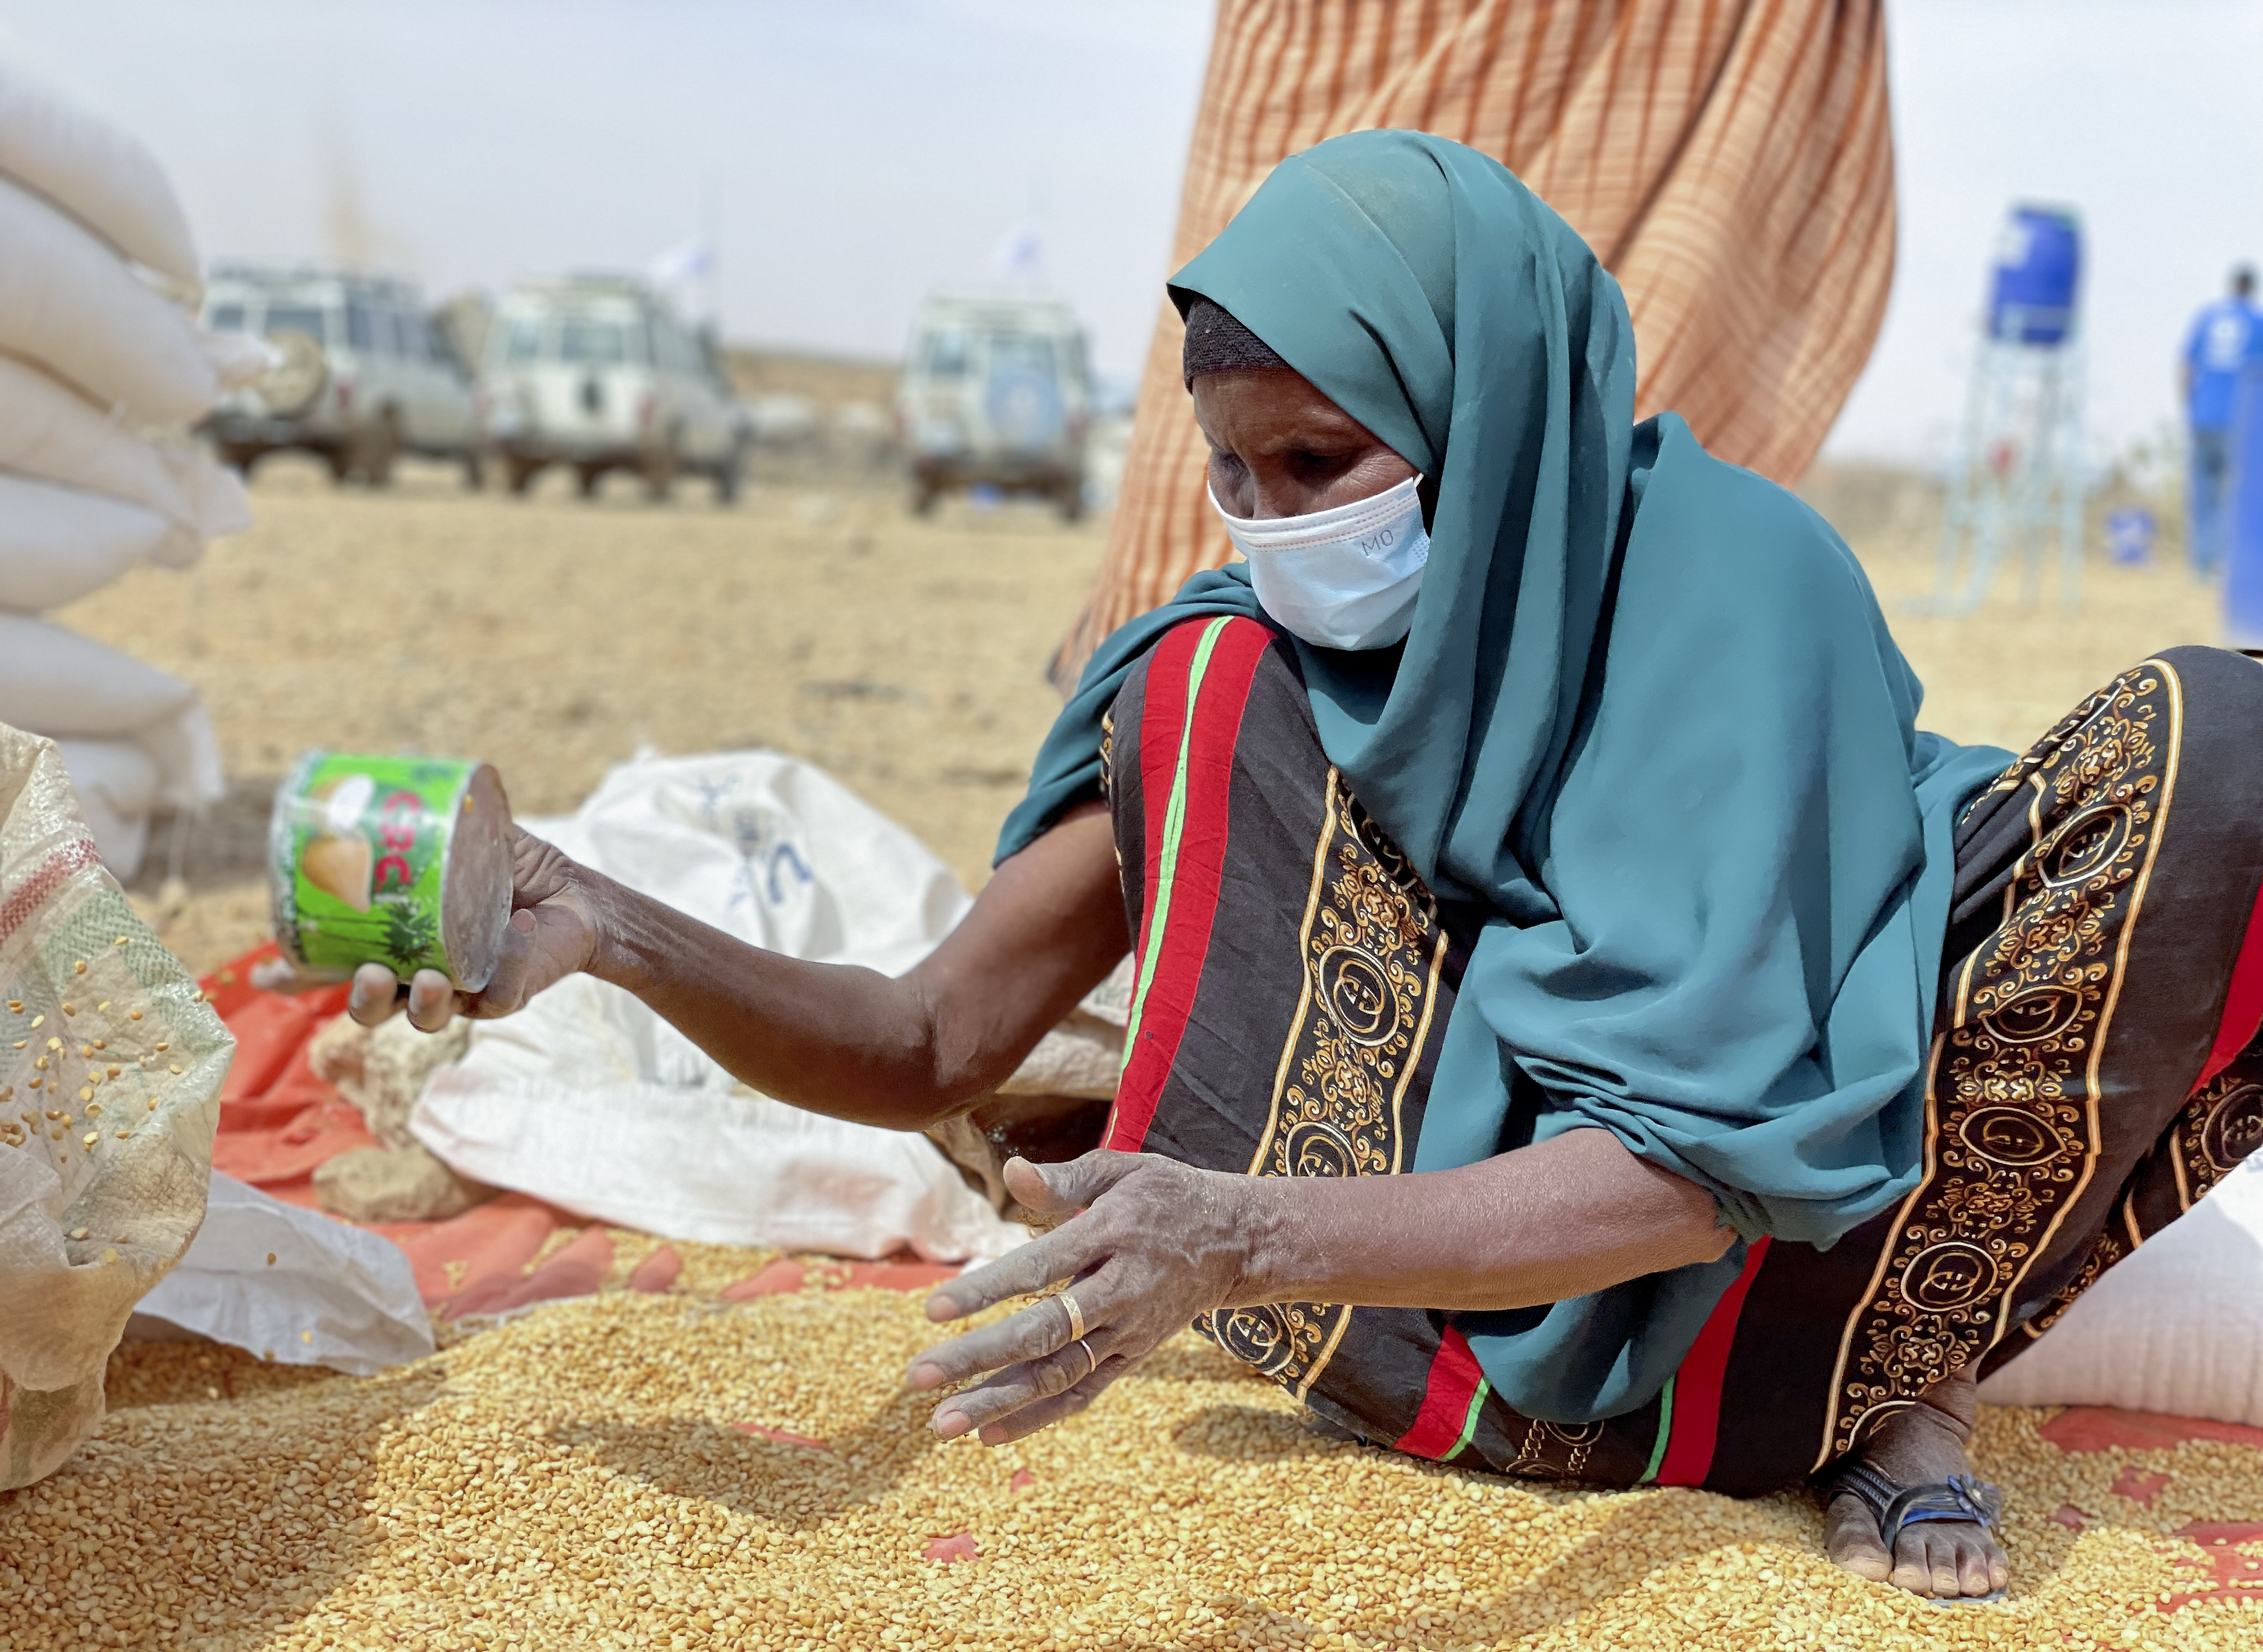 An Ethiopian woman sifts through distributed food supplies